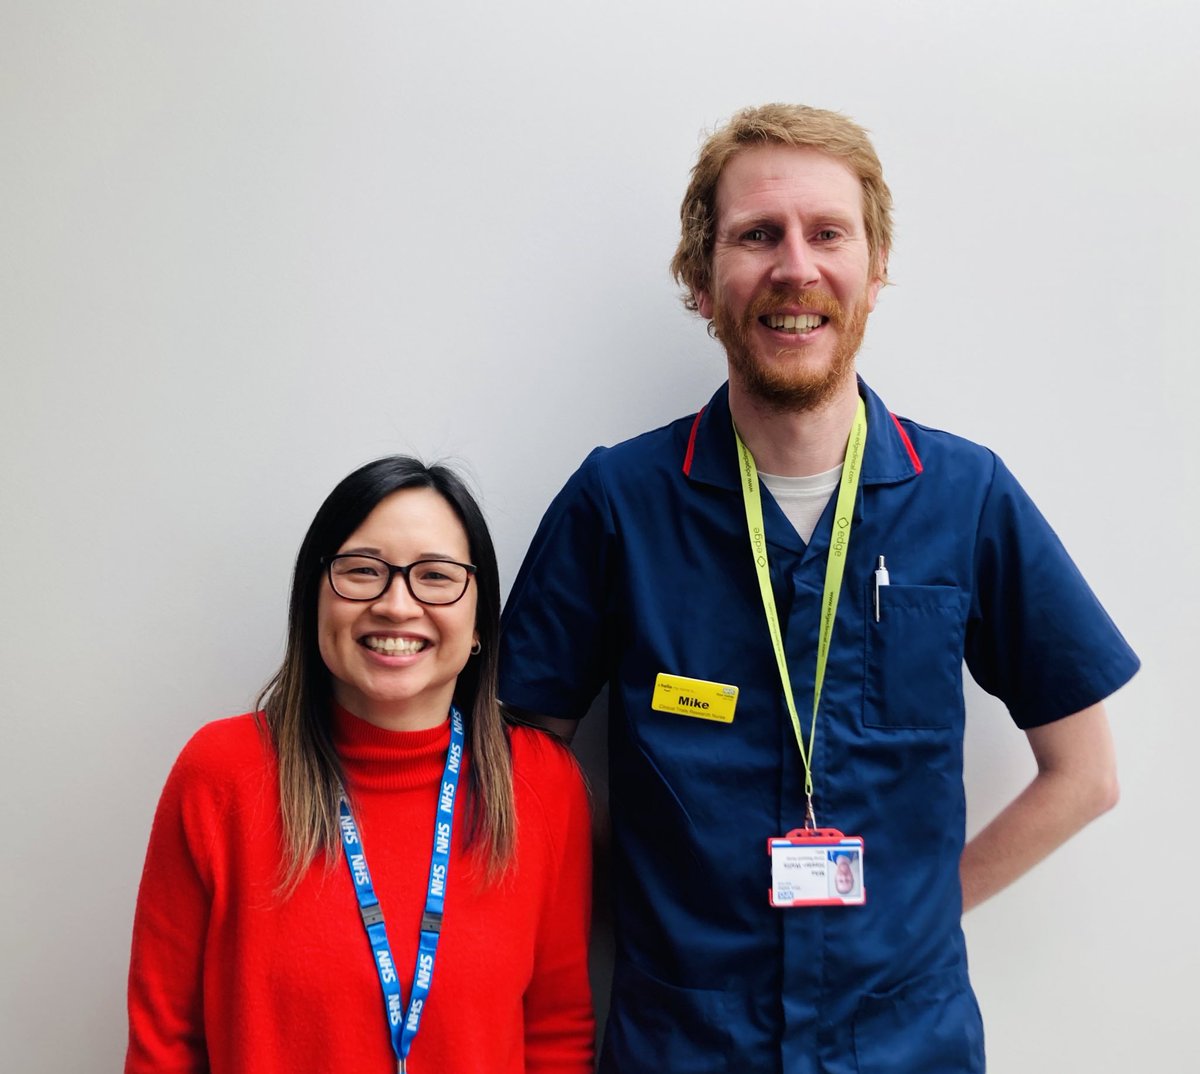 Mike (research nurse) and Wei May (data officer) have recently joined the Clinical Trials team at WVT - both working on a wide range of trials across specialities. Welcome to the team! @MapMikeWallis 
#amazingwvtstaff #bepartofresearch #nihr #clinicalresearch